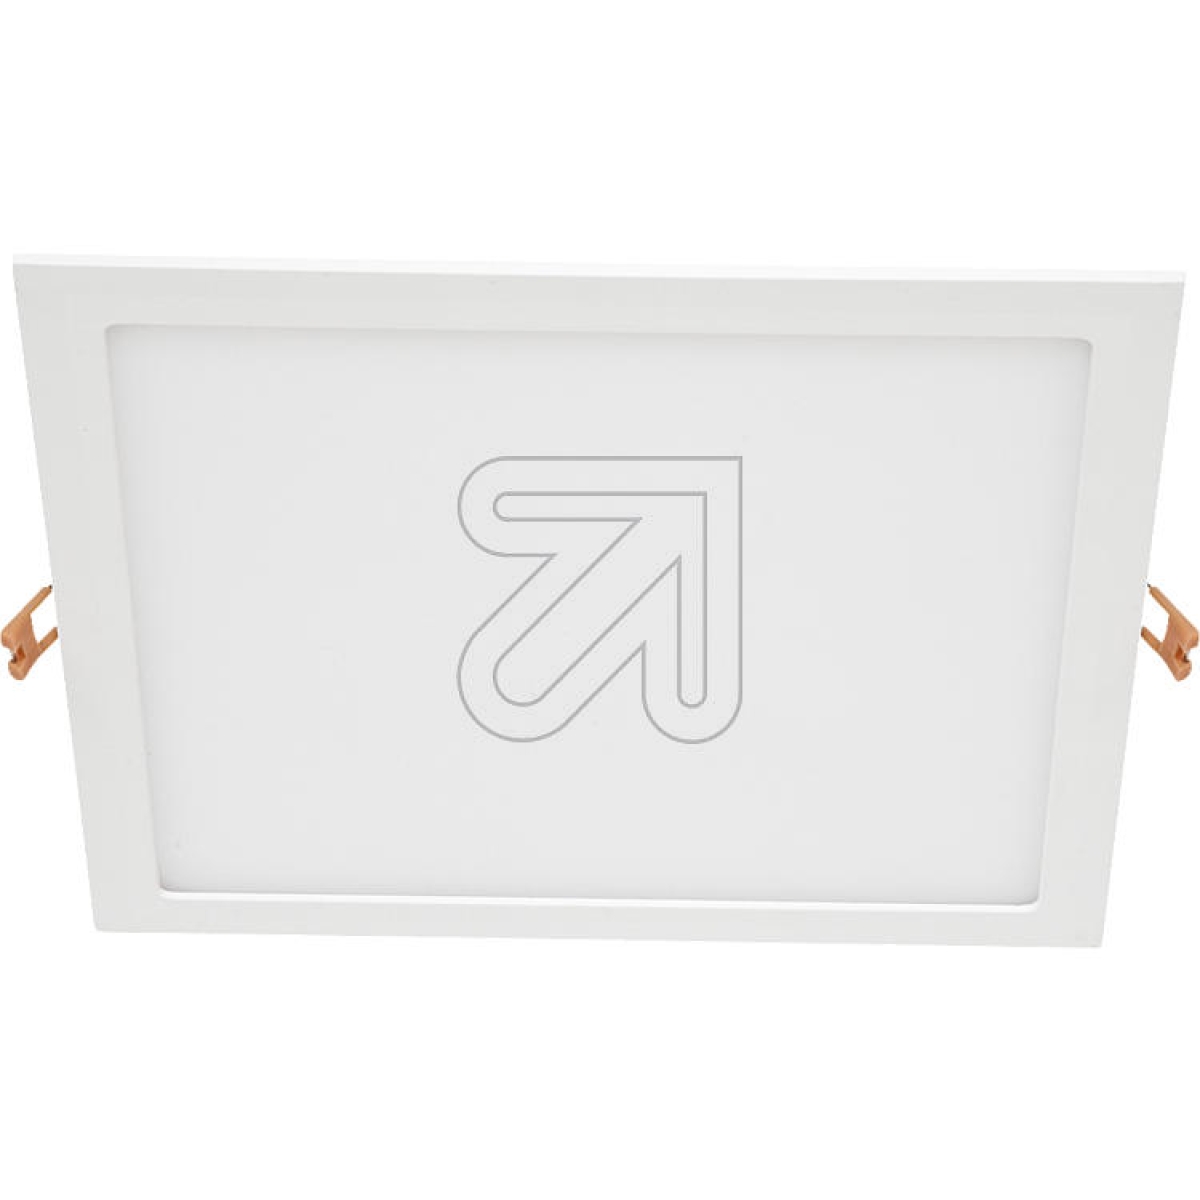 EVNLED recessed light 27W 4000K, white, square 350mA, beam angle 120°, dimmable, LPQW303540Article-No: 629470